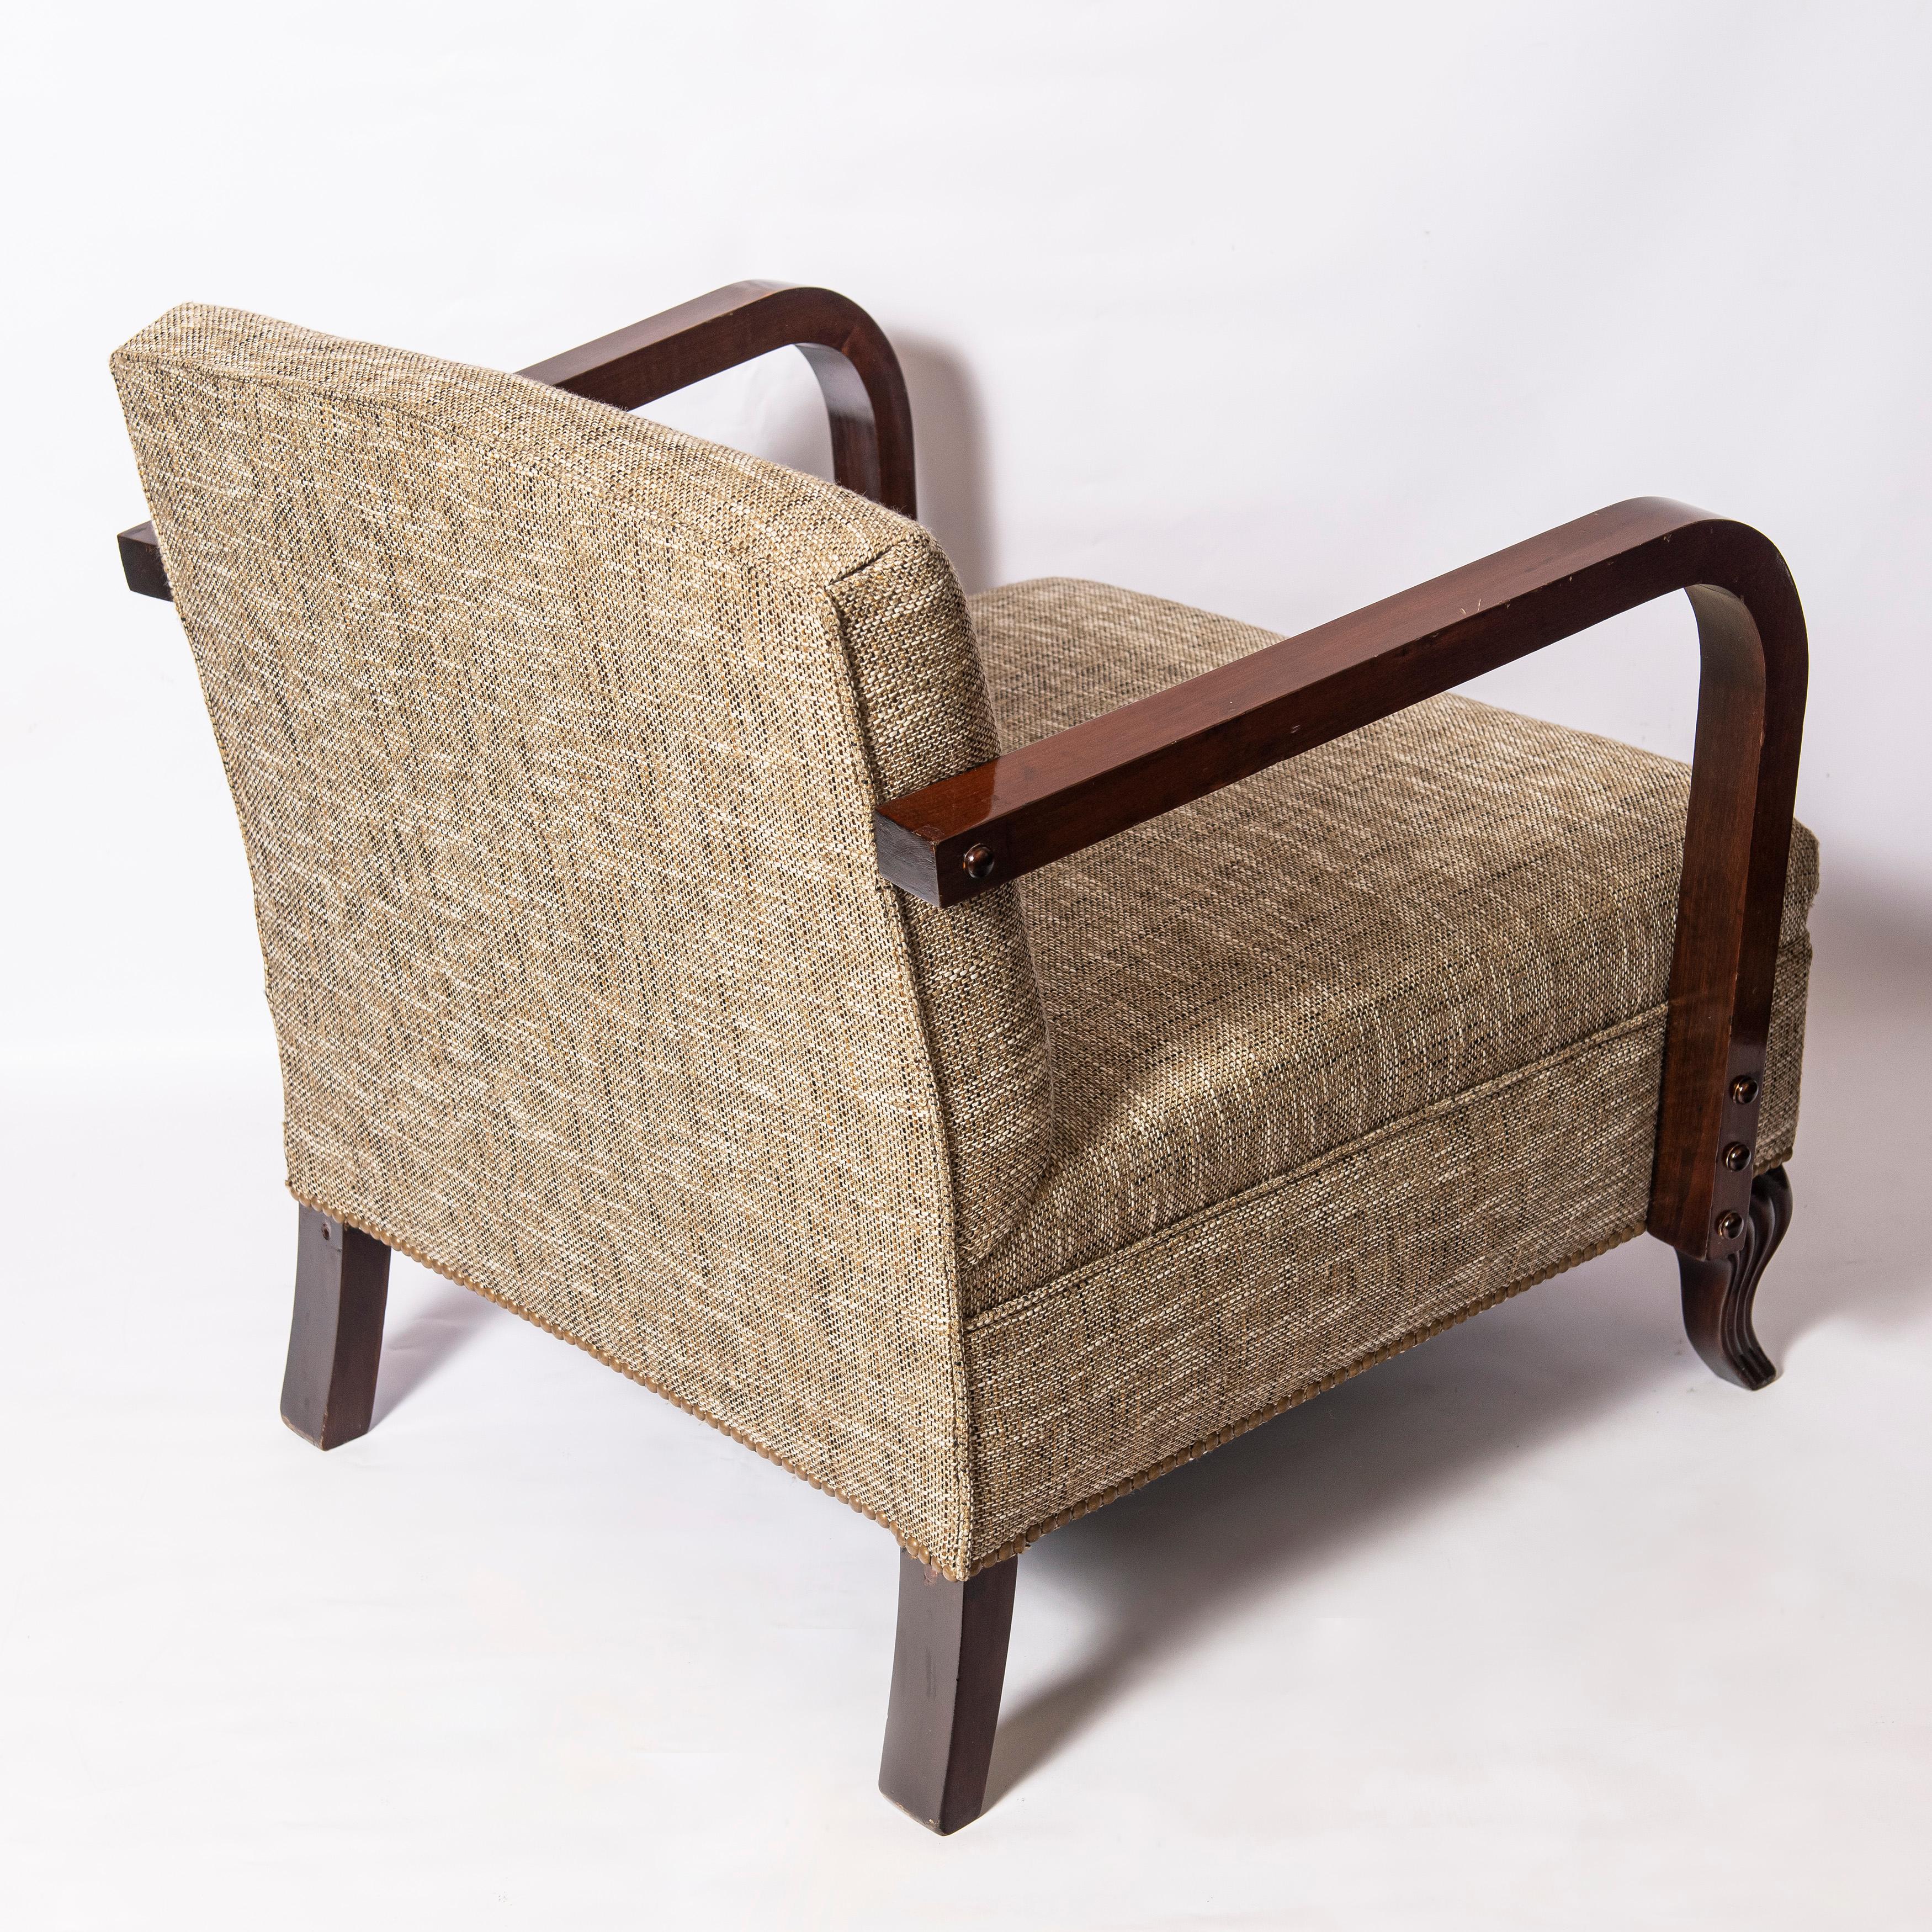 Mid-20th Century Pair of Wood and Fabric Armchairs, Art Deco Period, France, circa 1940 For Sale